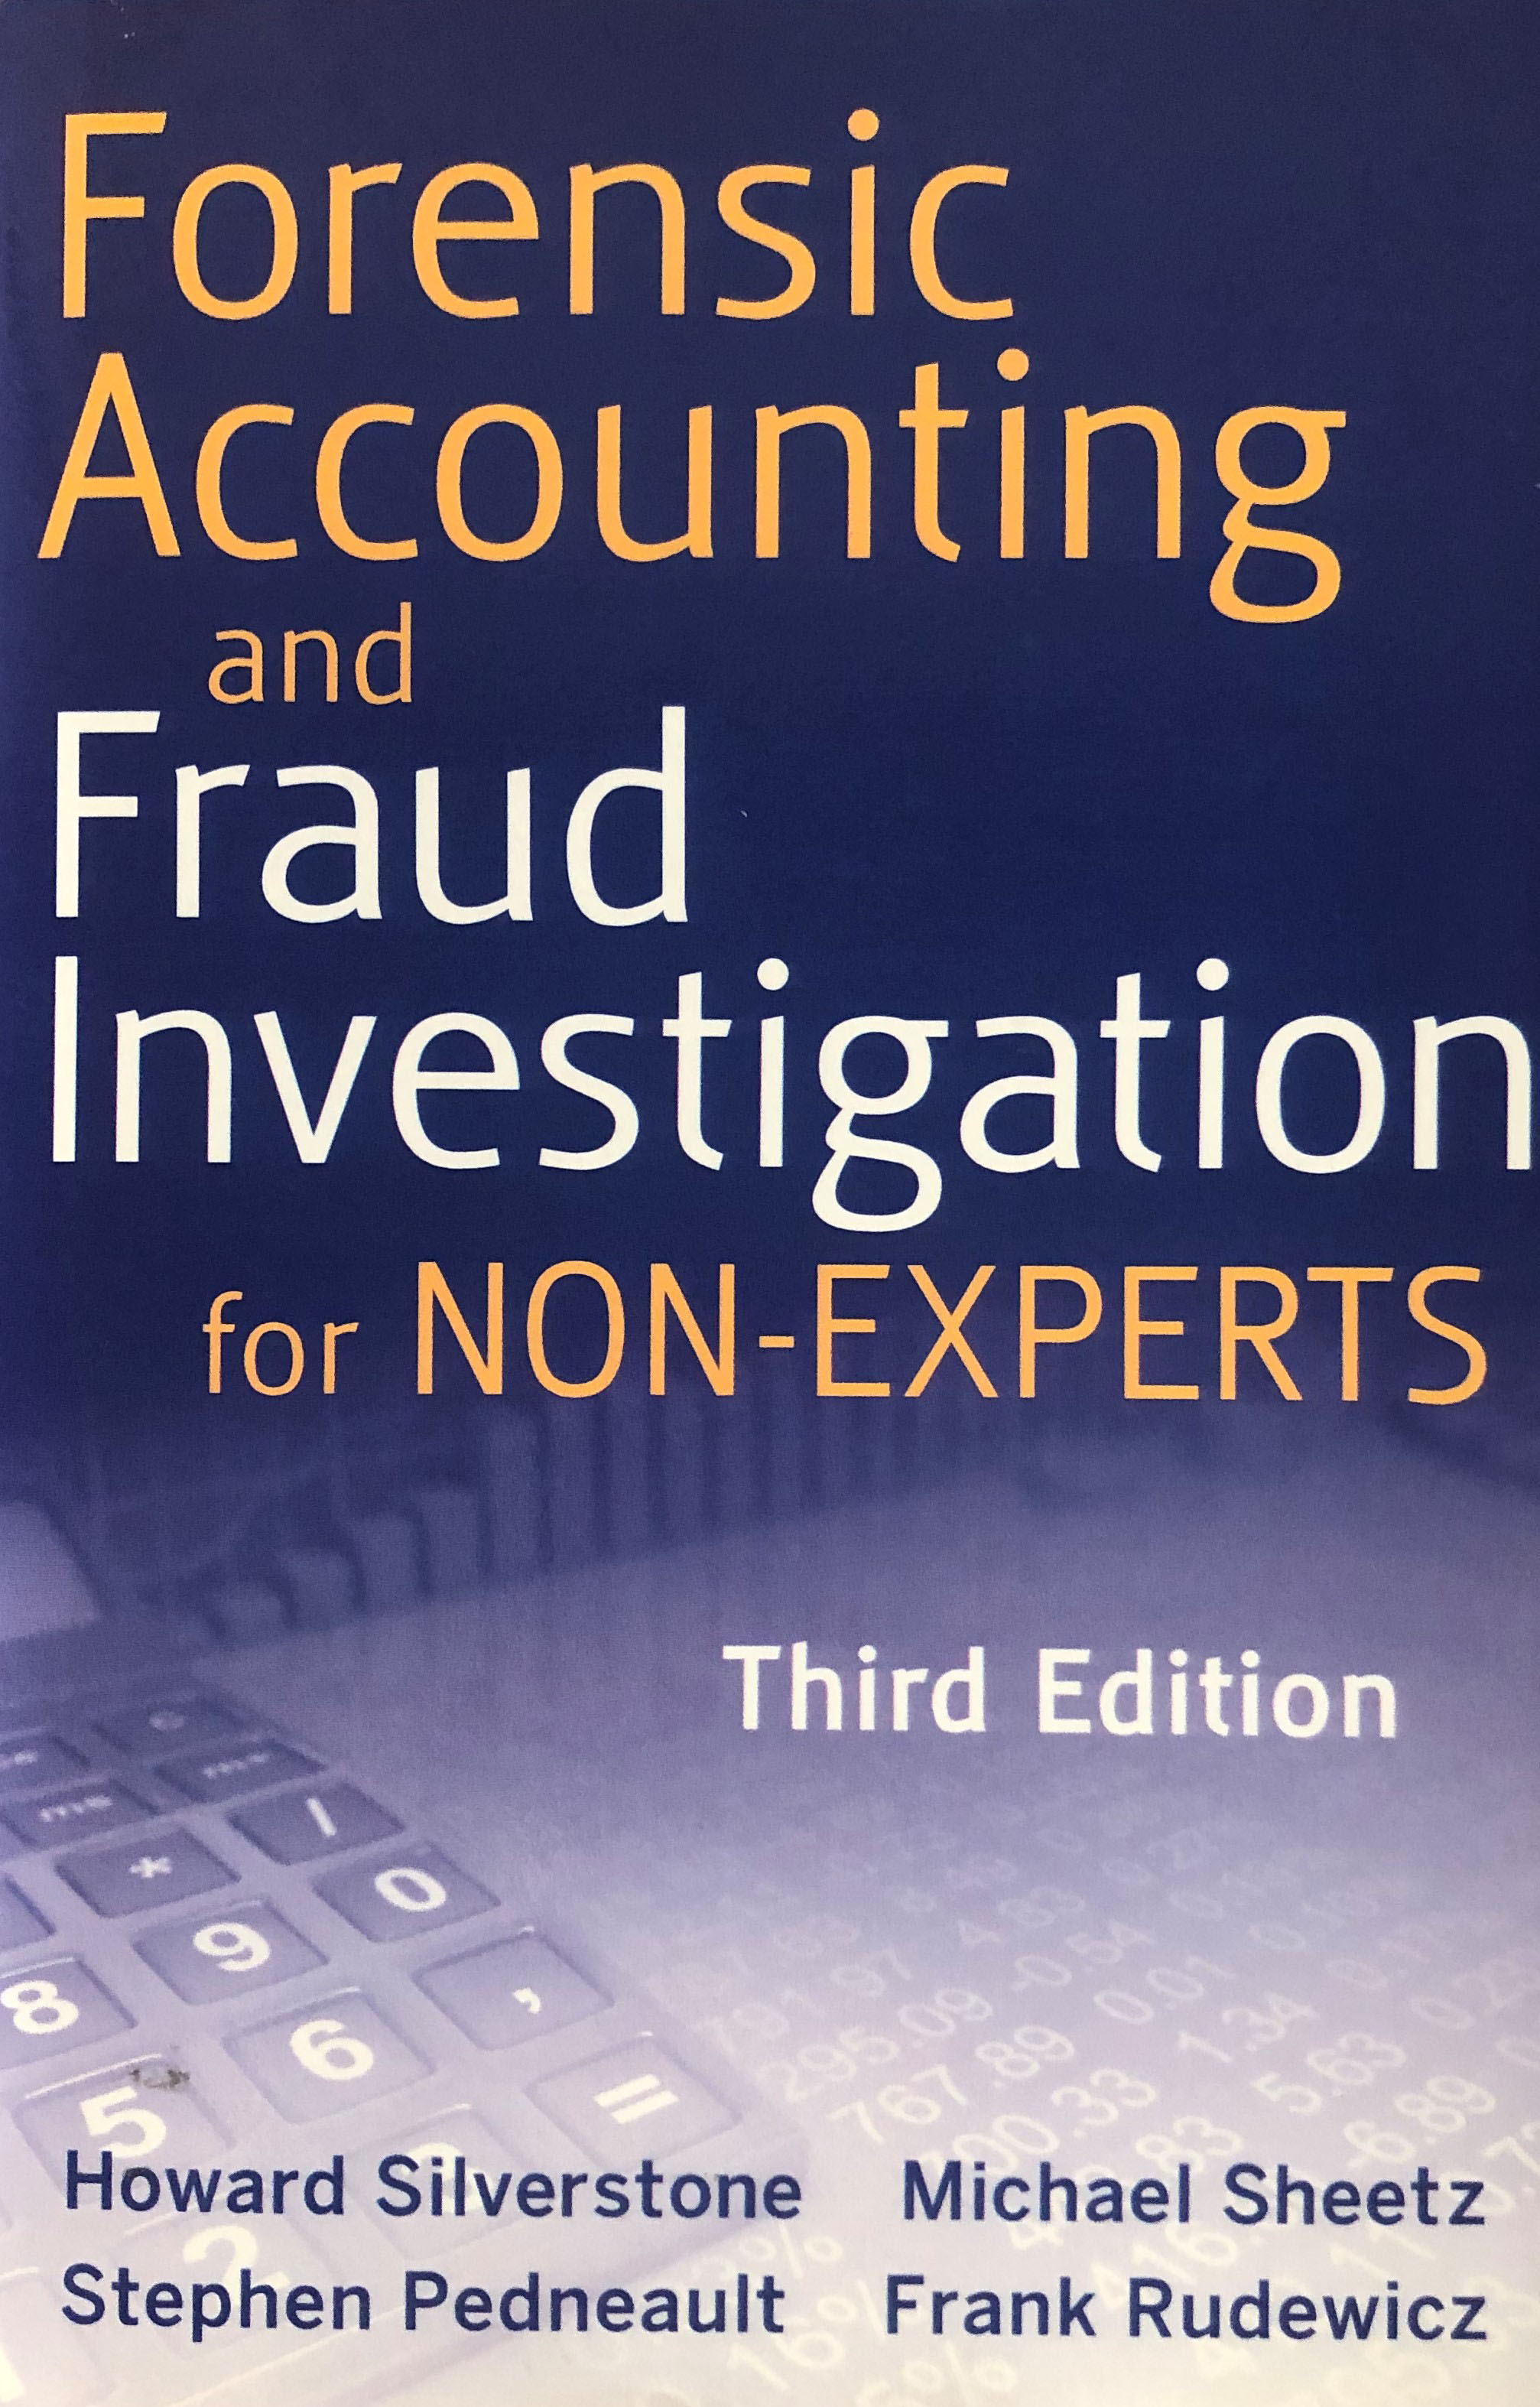 Description Forensic Accounting and Fraud Investigation for Non-Experts